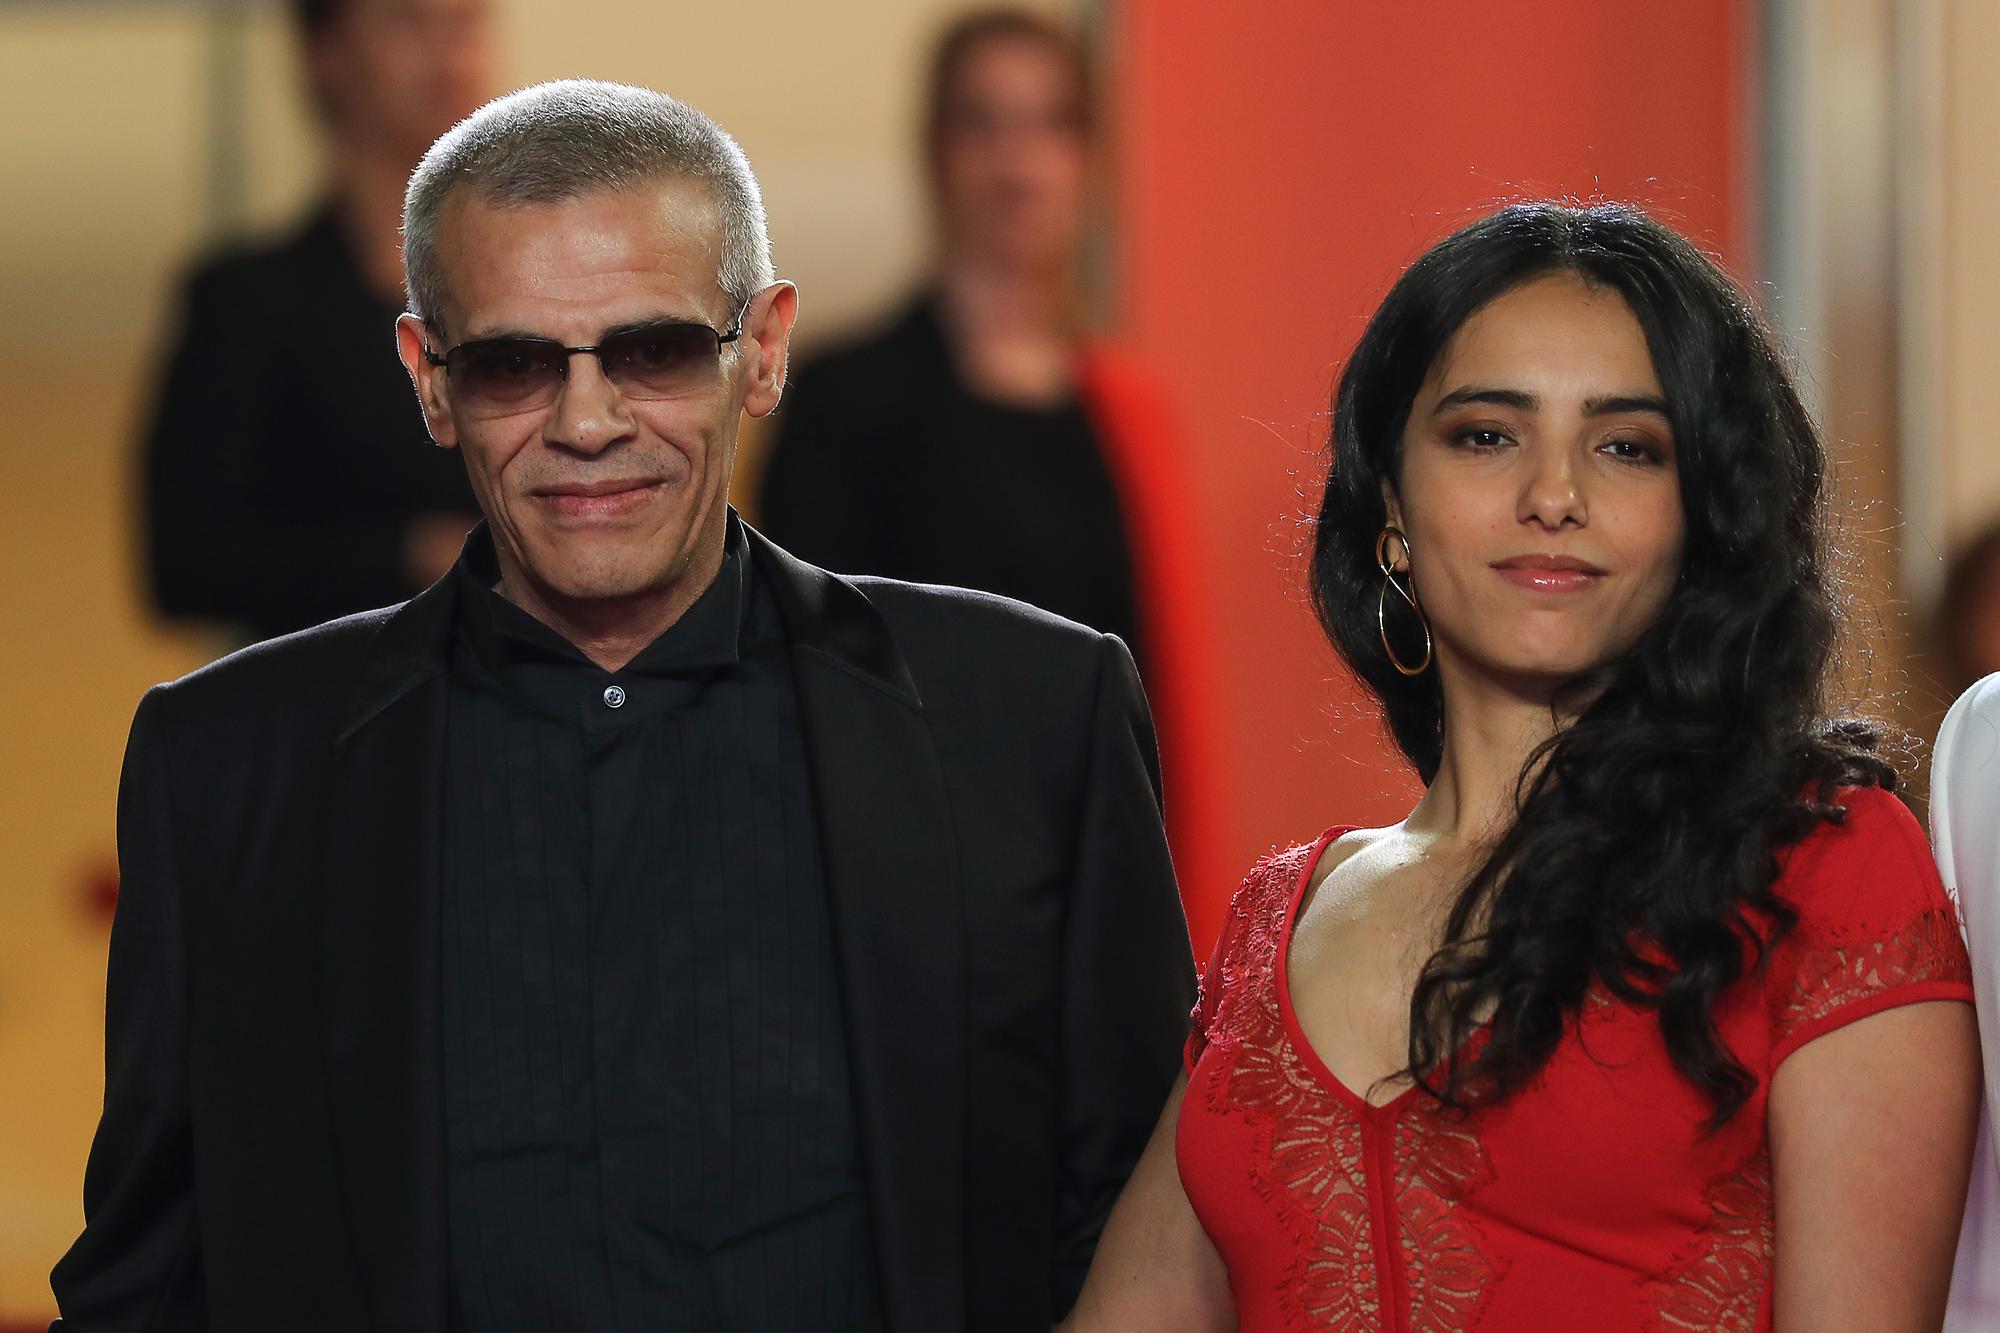 French-Tunisian film director Abdellatif Kechiche and French actress Hafsia Herzi pose as they arrive for the screening of the film "Mektoub, My Love : Intermezzo" at the 72nd edition of the Cannes Film Festival in Cannes, southern France, on May 23, 2019. Valery HACHE / AFP [AFP - Valery HACHE]